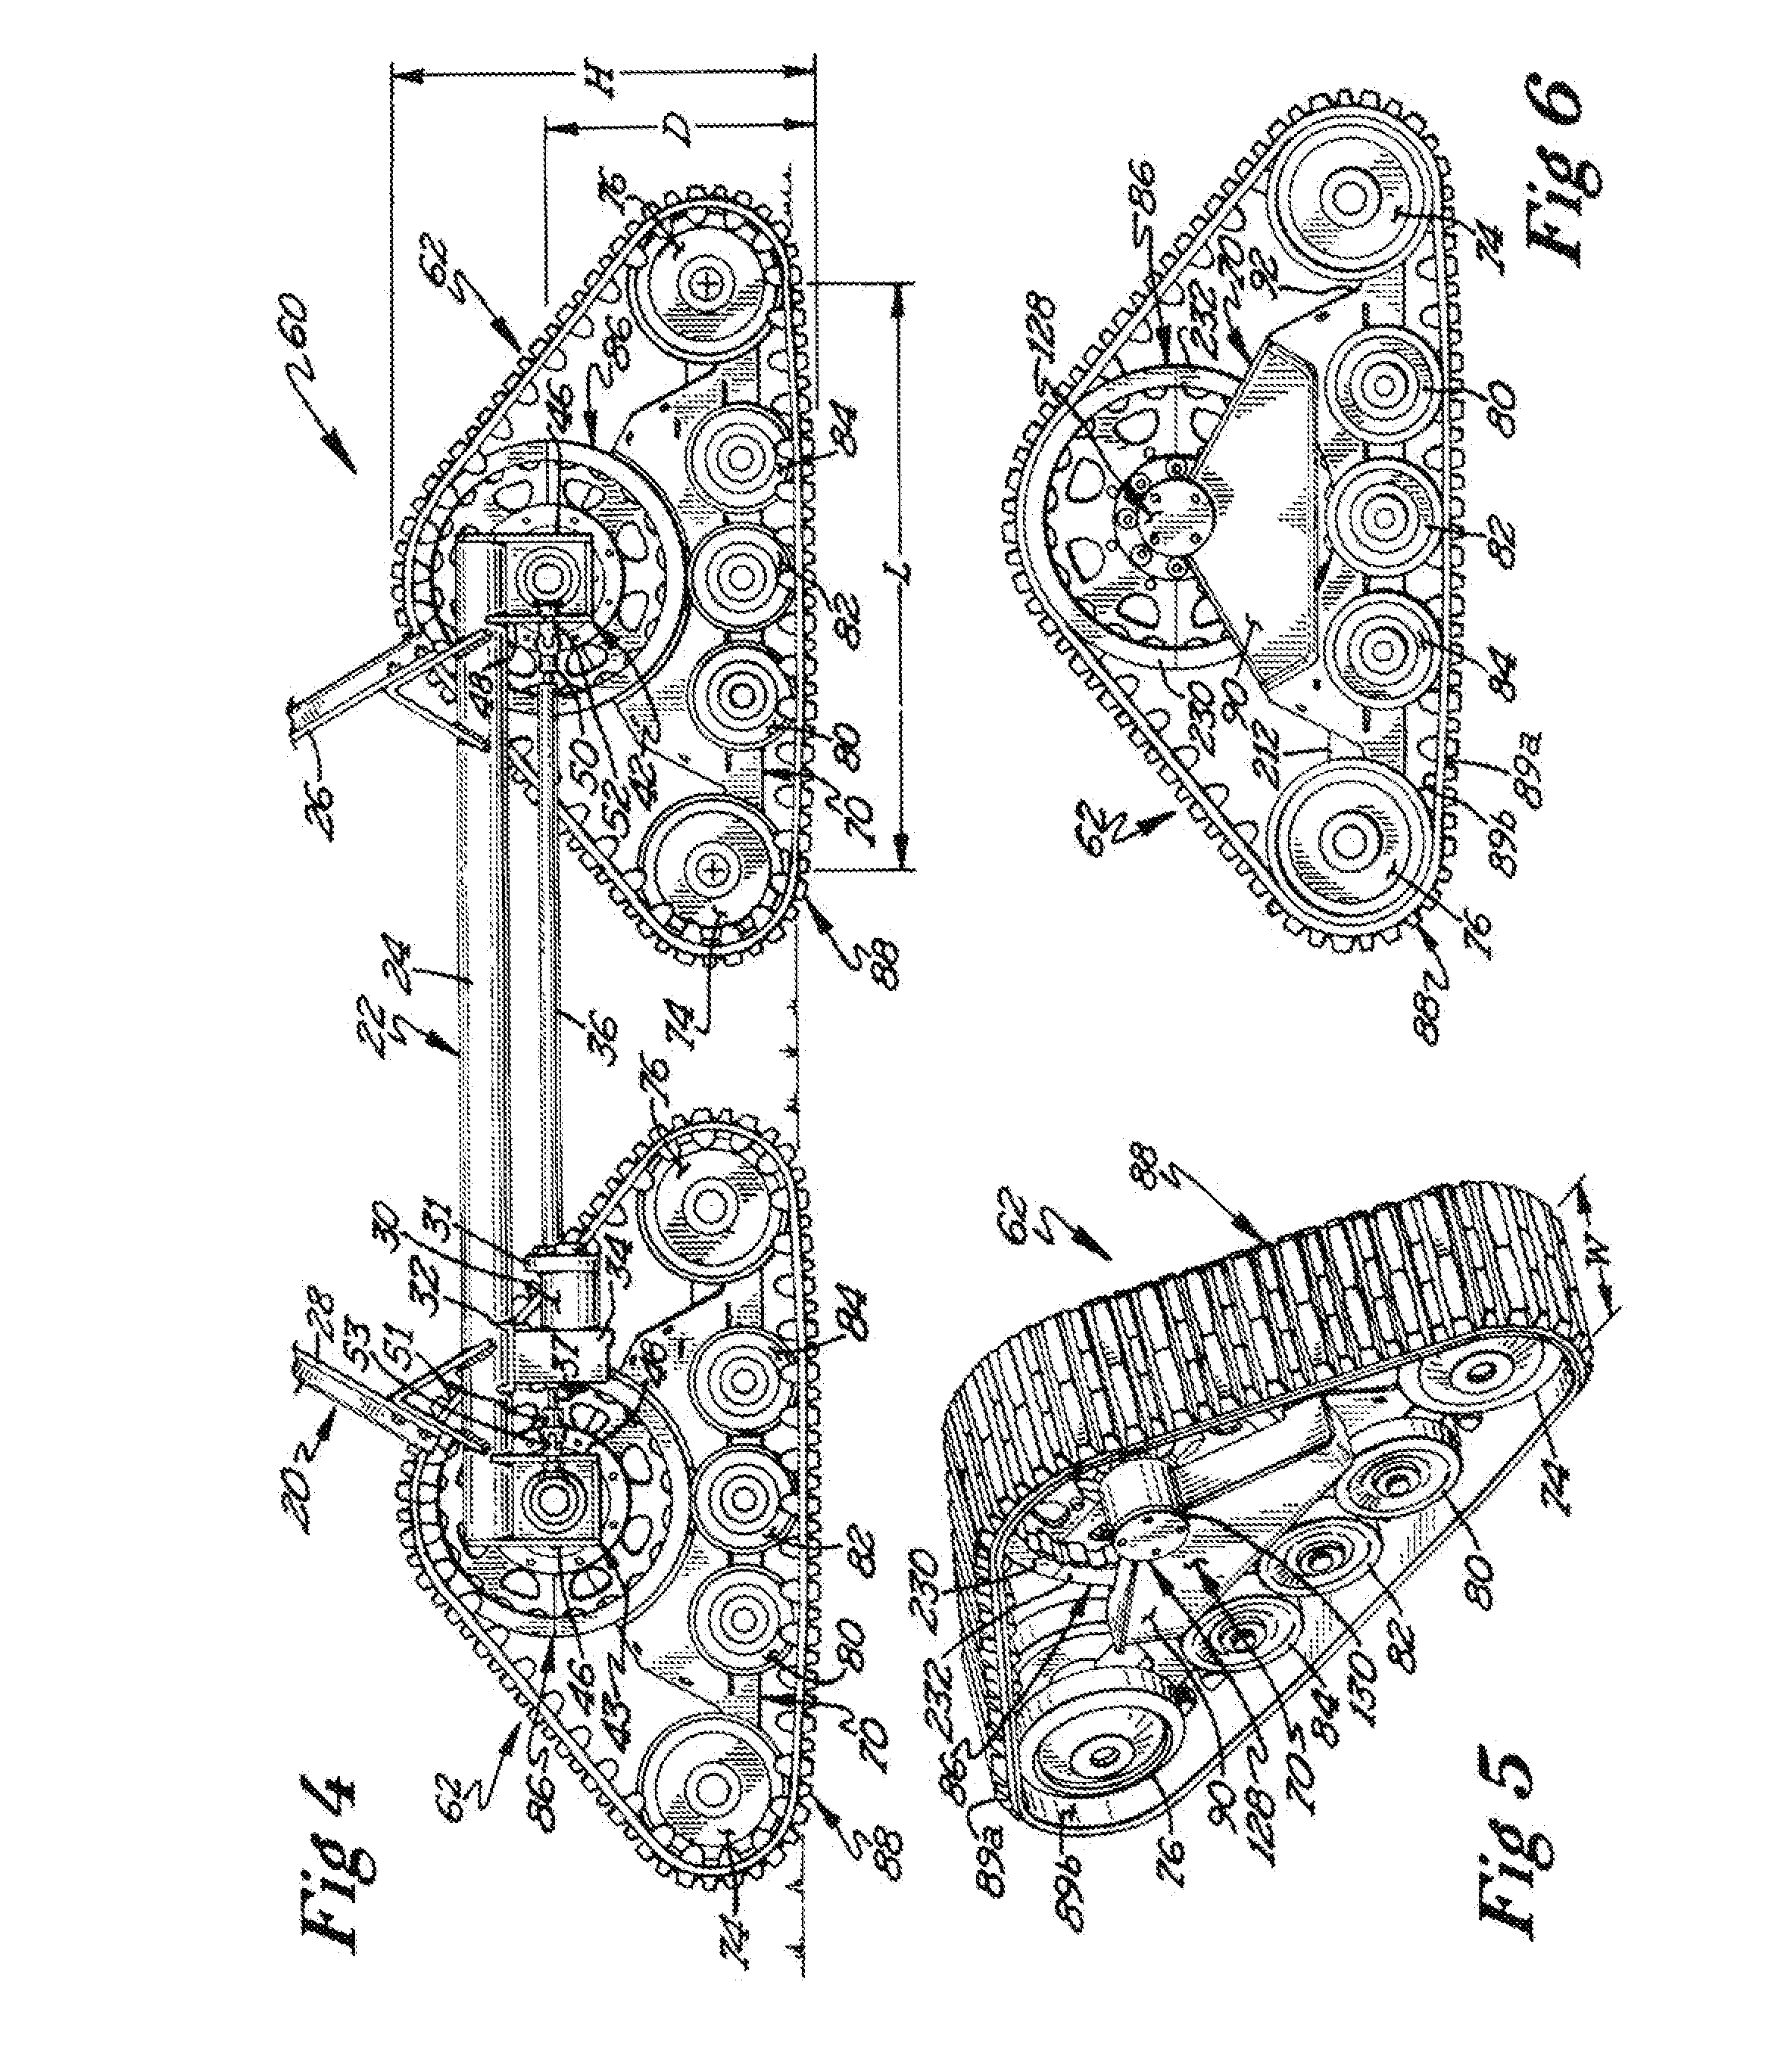 Apparatus for Converting a Wheeled Vehicle to a Tracked Vehicle